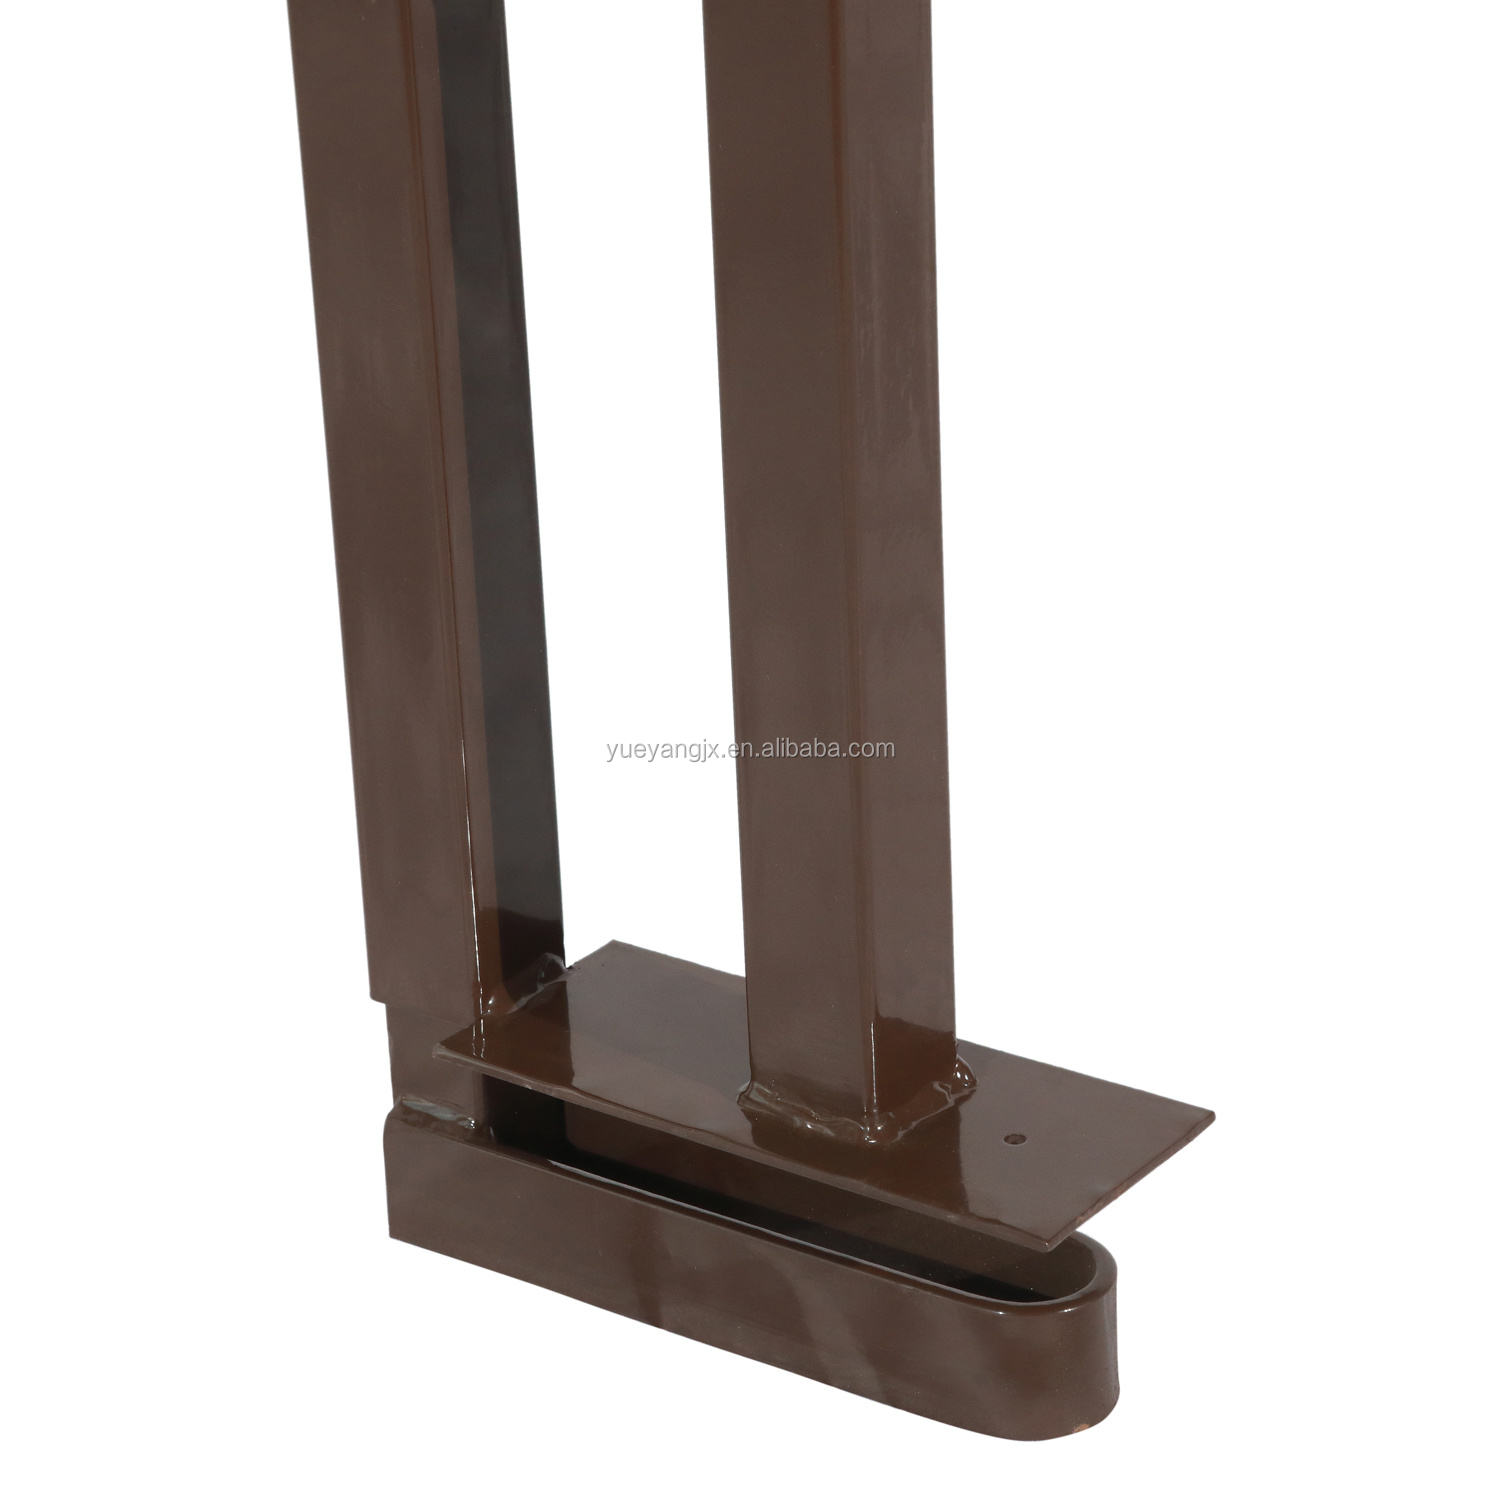 Base clamp, maxmum height 511mm, to clamp the concret slab or formwork timber